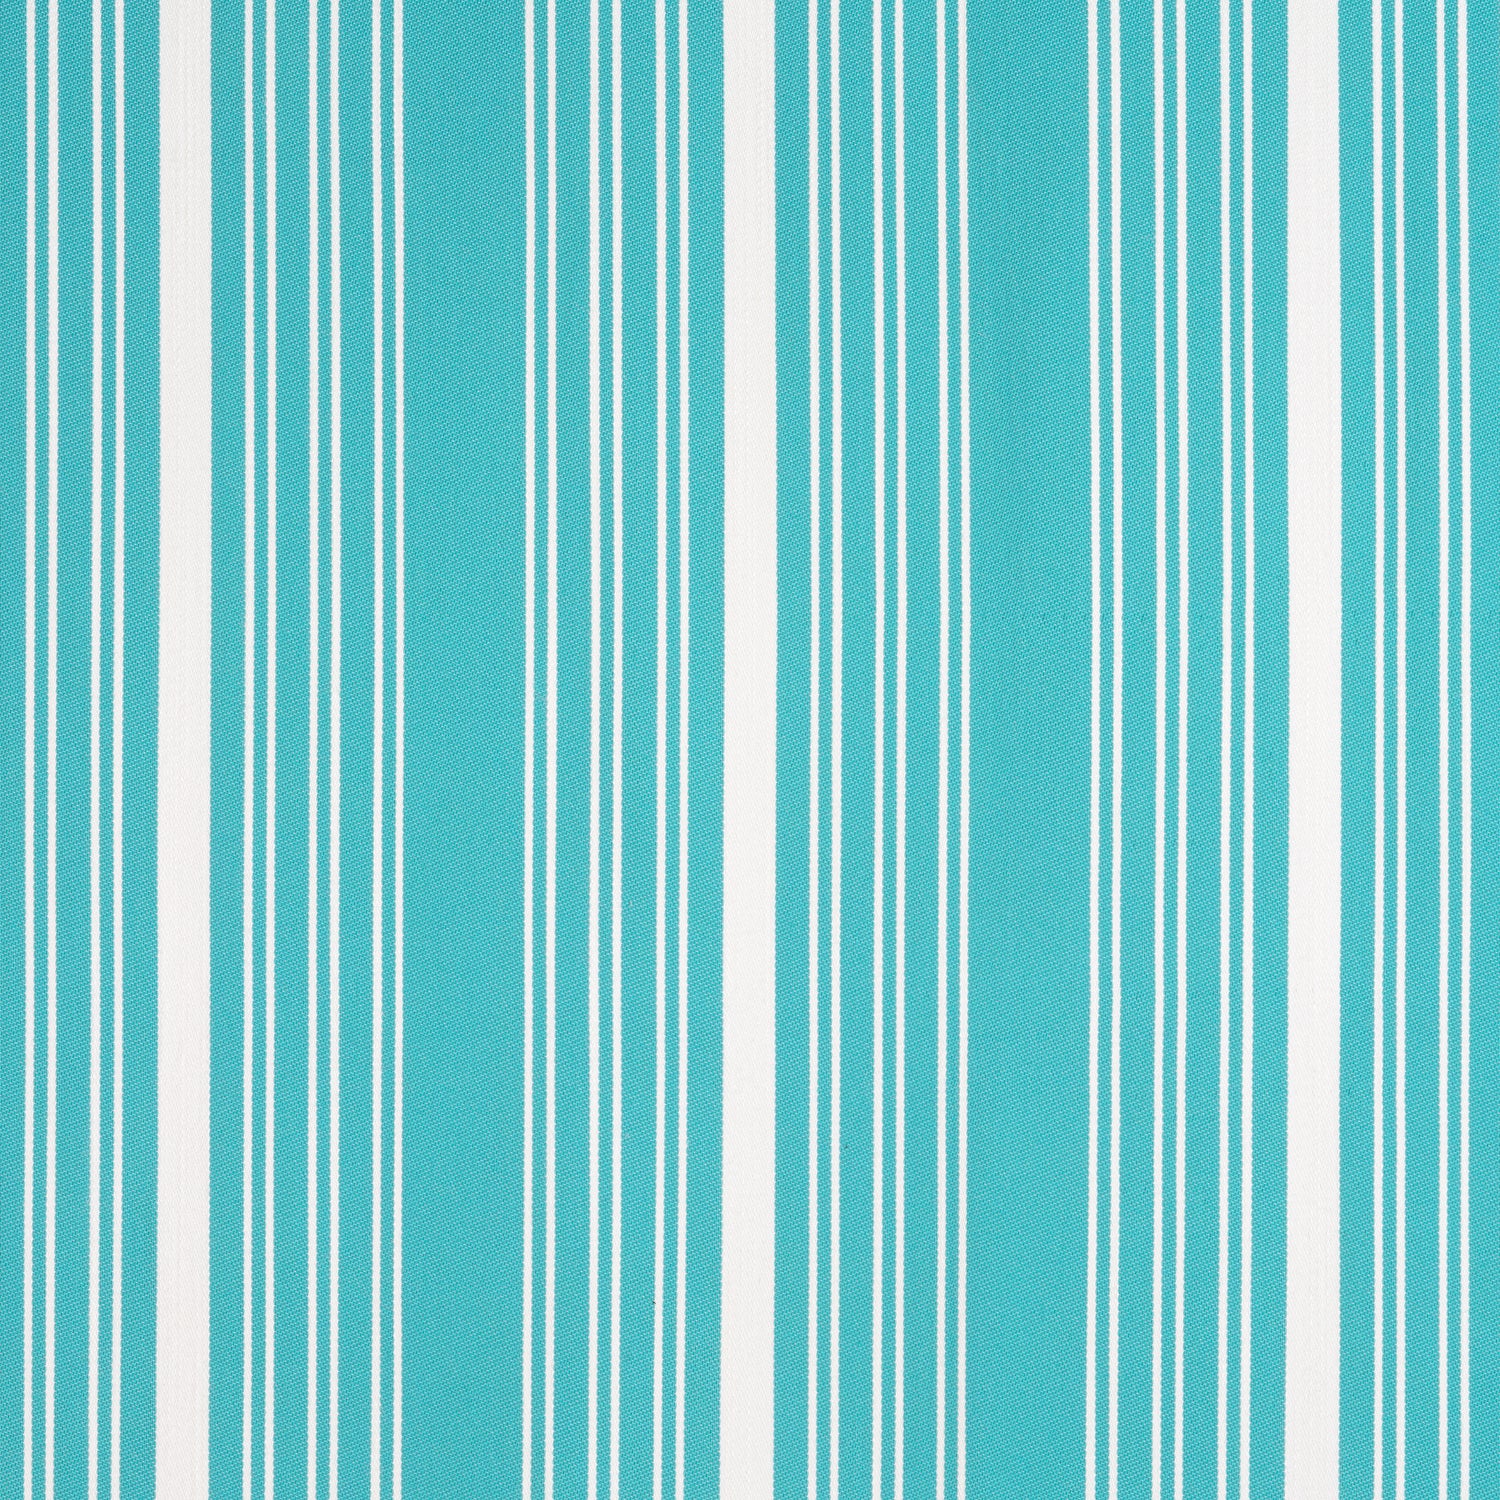 Kaia Stripe fabric in capri color - pattern number W8543 - by Thibaut in the Villa collection